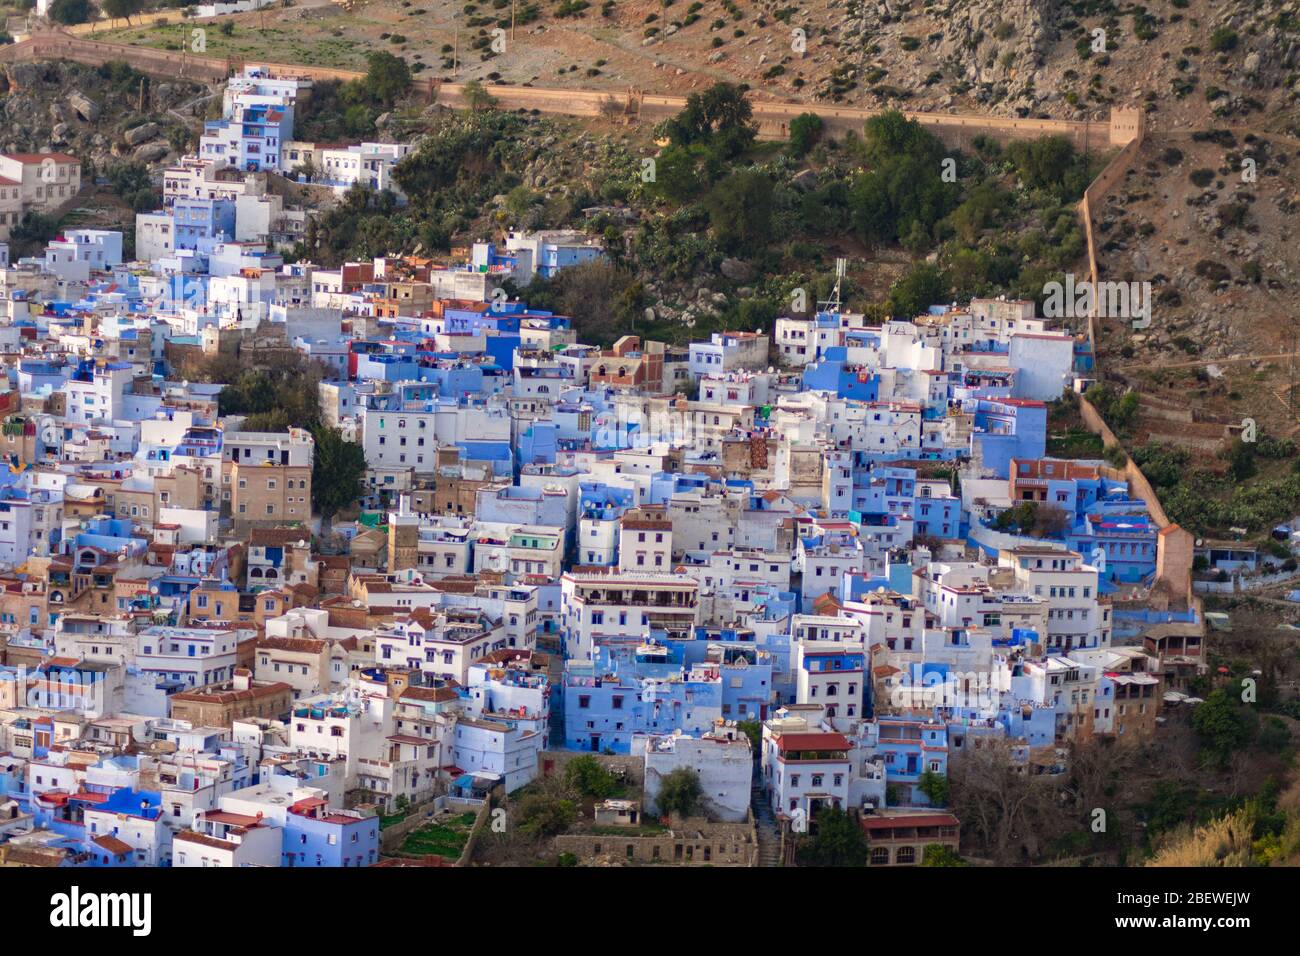 Skyline of Chefchaouen Morocco surrounded by the Old City Walls Stock Photo